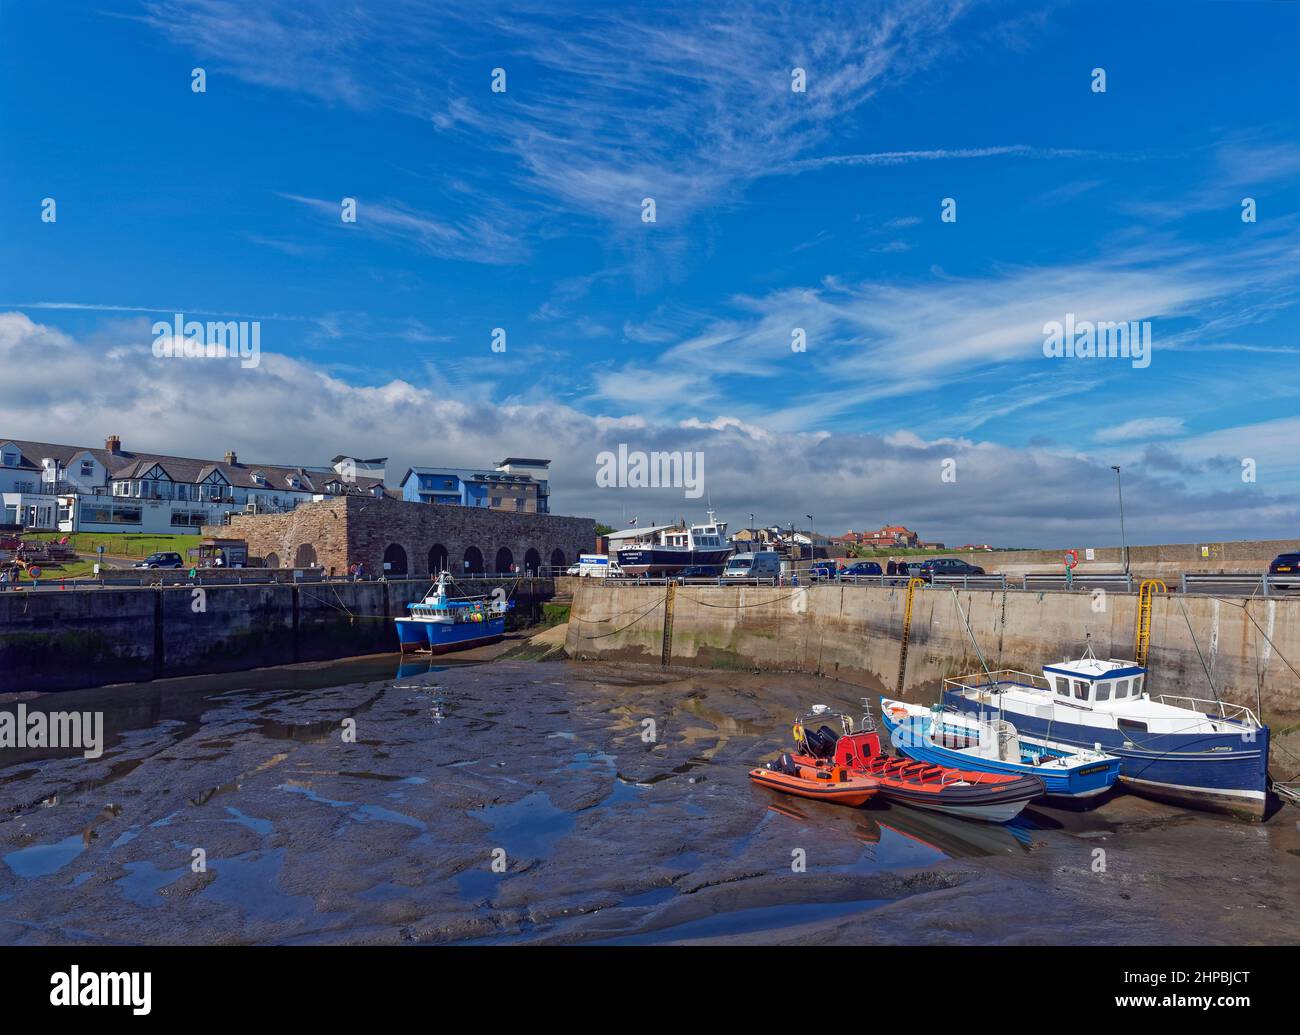 North Sunderland harbour at Seahouses at Low Tide, with Boats resting on the silty bottom of the Harbour, overlooked by Houses and Commercial Building Stock Photo